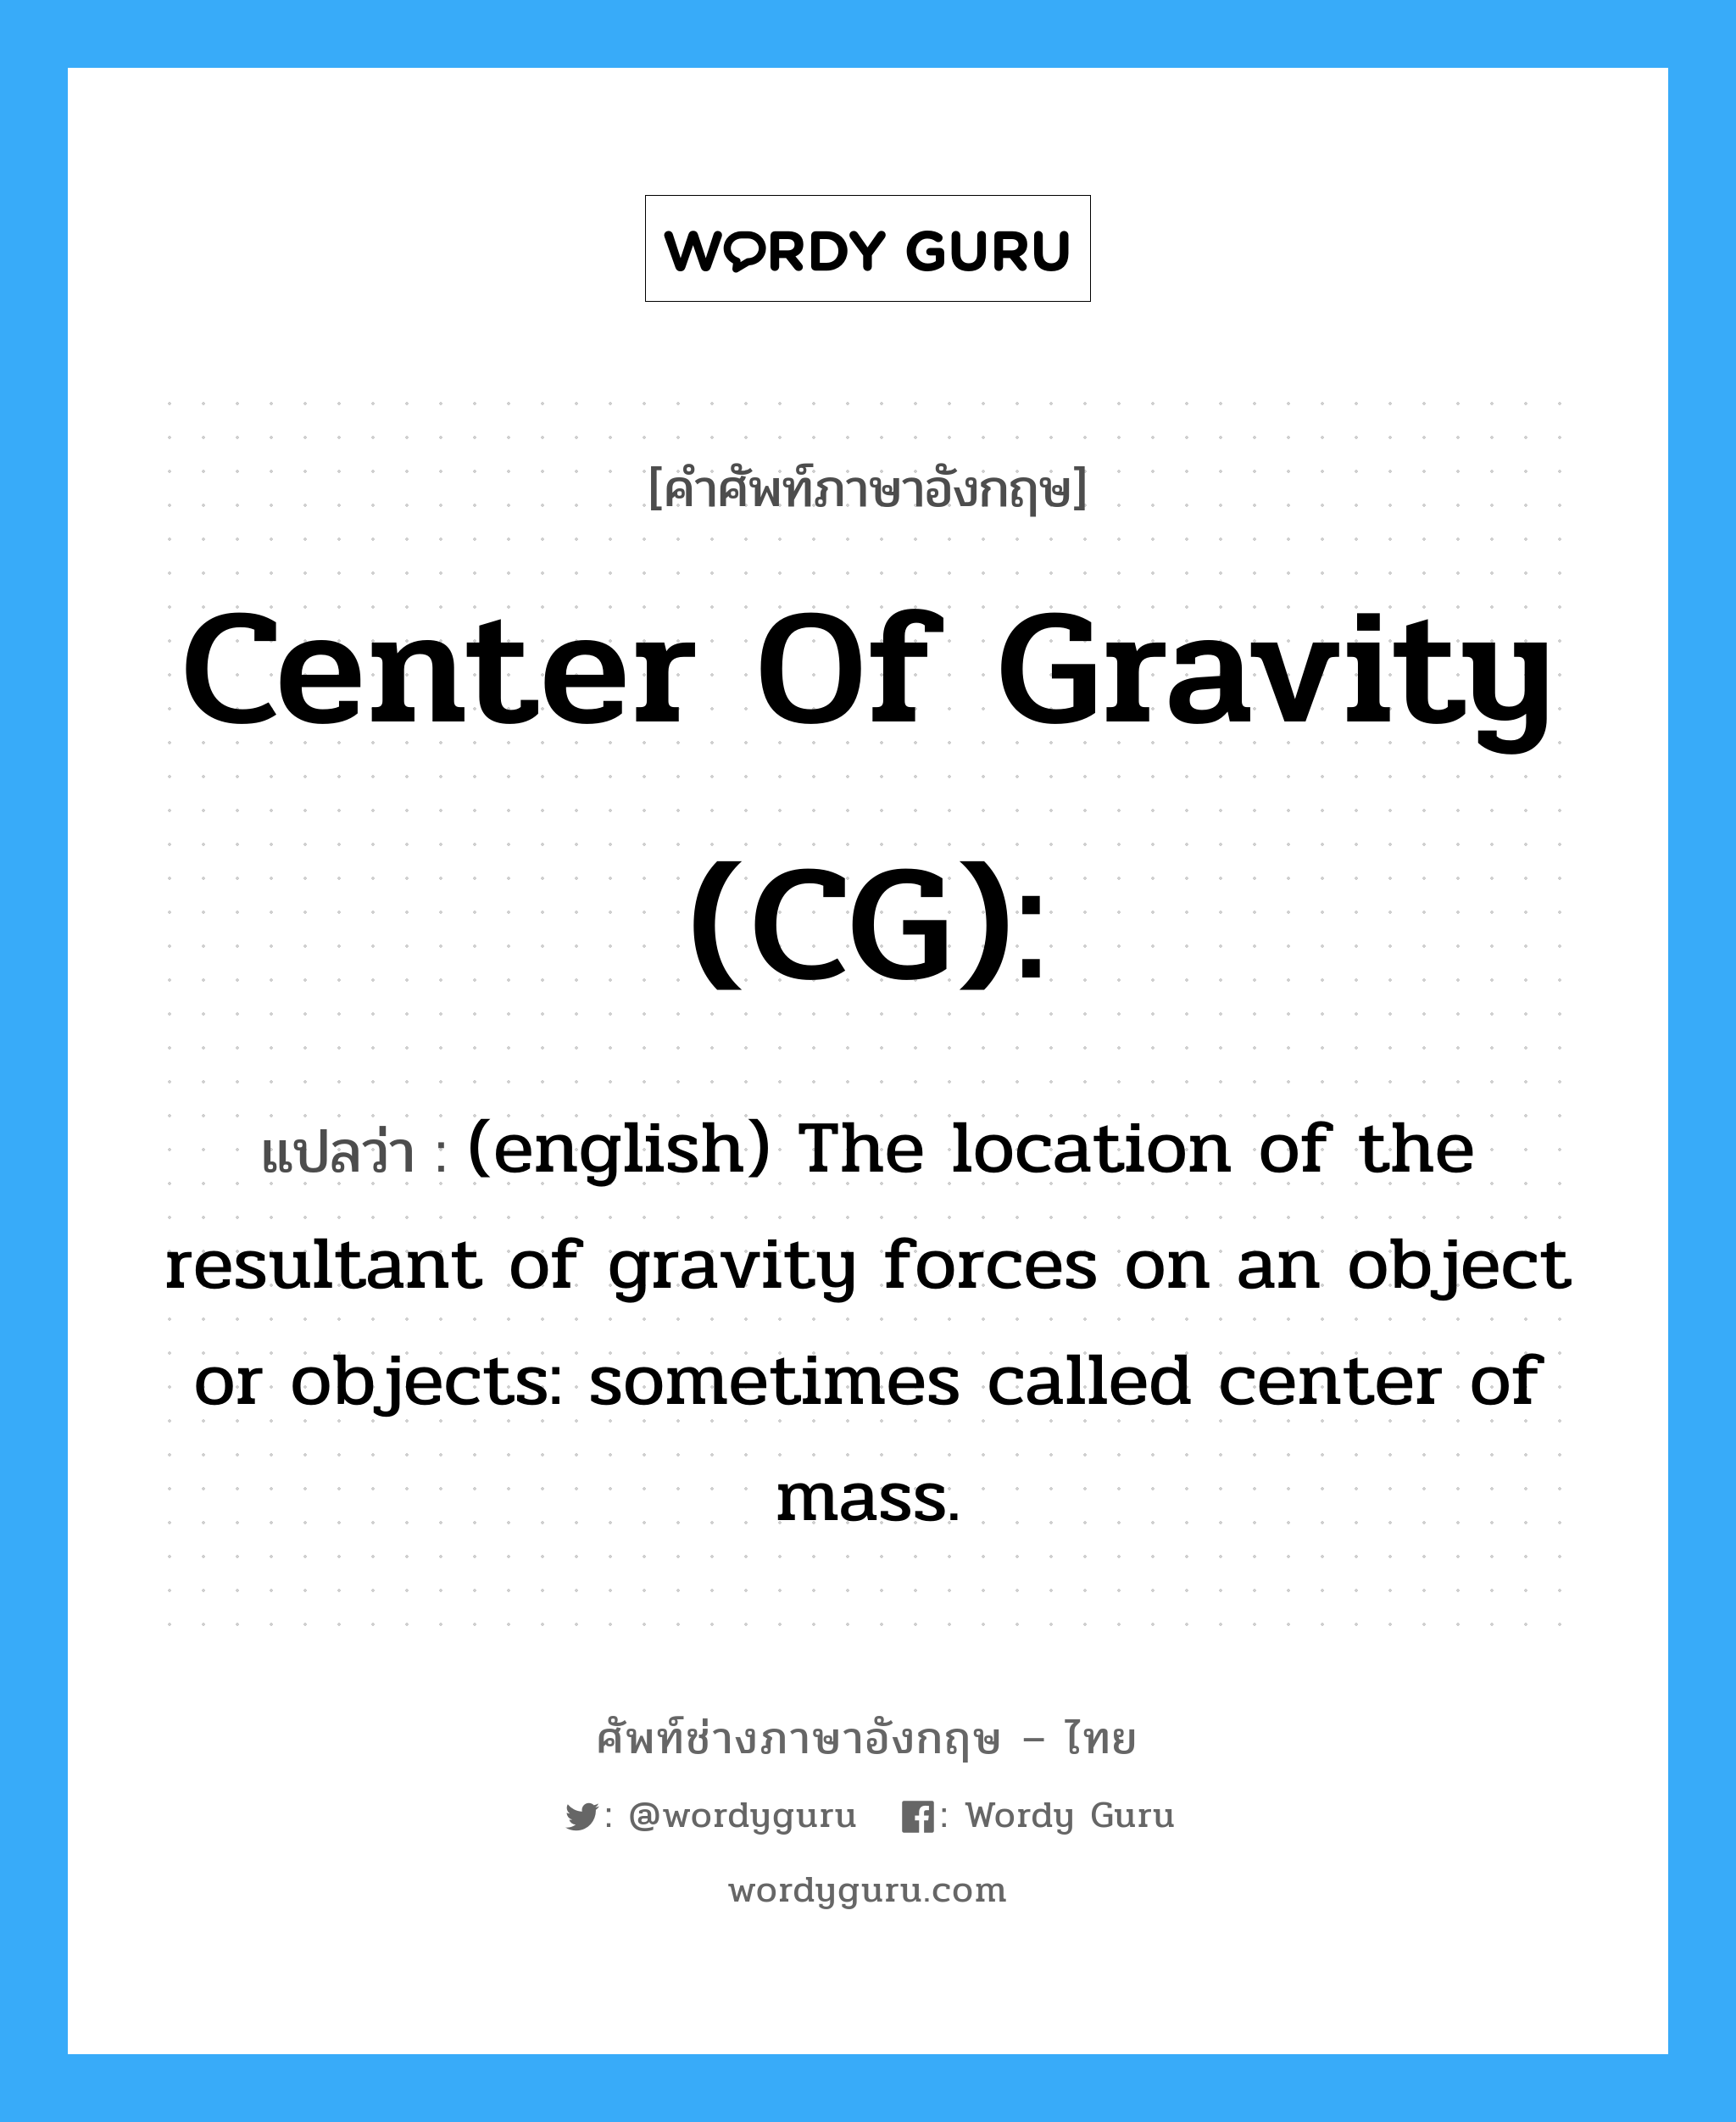 Center of Gravity (CG): แปลว่า?, คำศัพท์ช่างภาษาอังกฤษ - ไทย Center of Gravity (CG): คำศัพท์ภาษาอังกฤษ Center of Gravity (CG): แปลว่า (english) The location of the resultant of gravity forces on an object or objects: sometimes called center of mass.